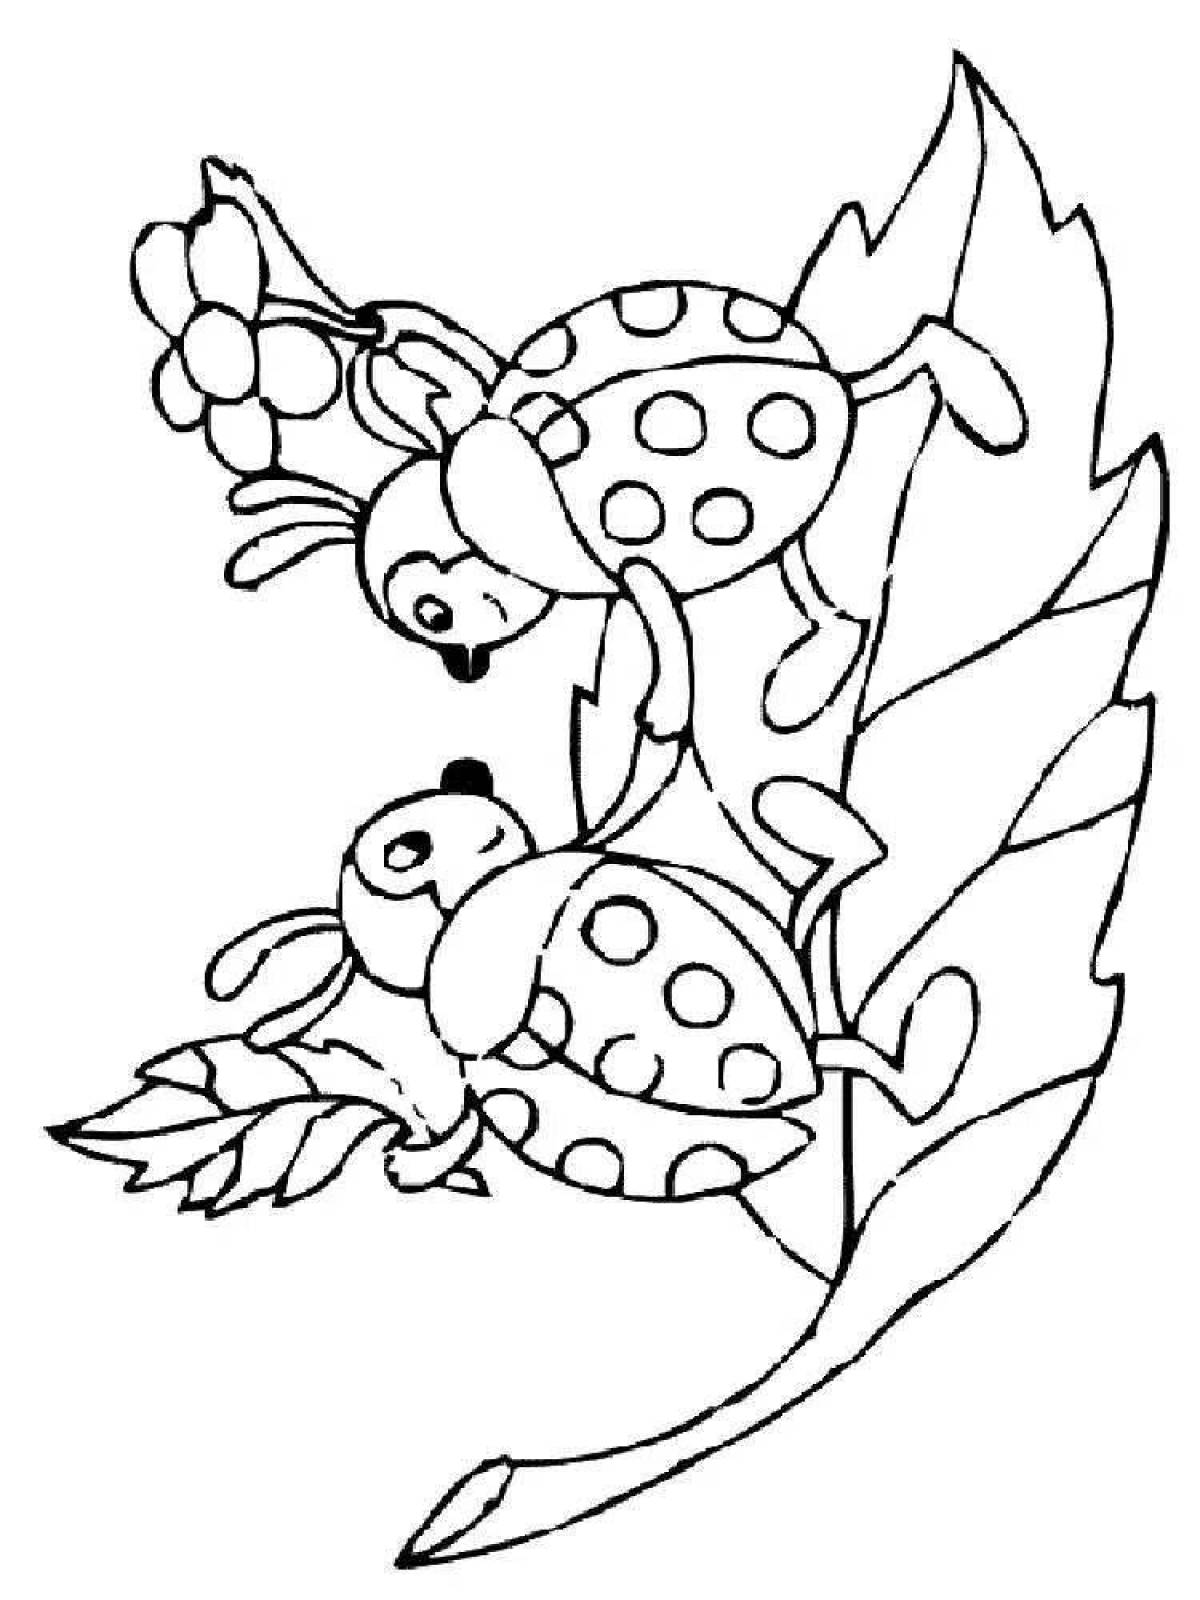 Fancy ladybug coloring pages for kids